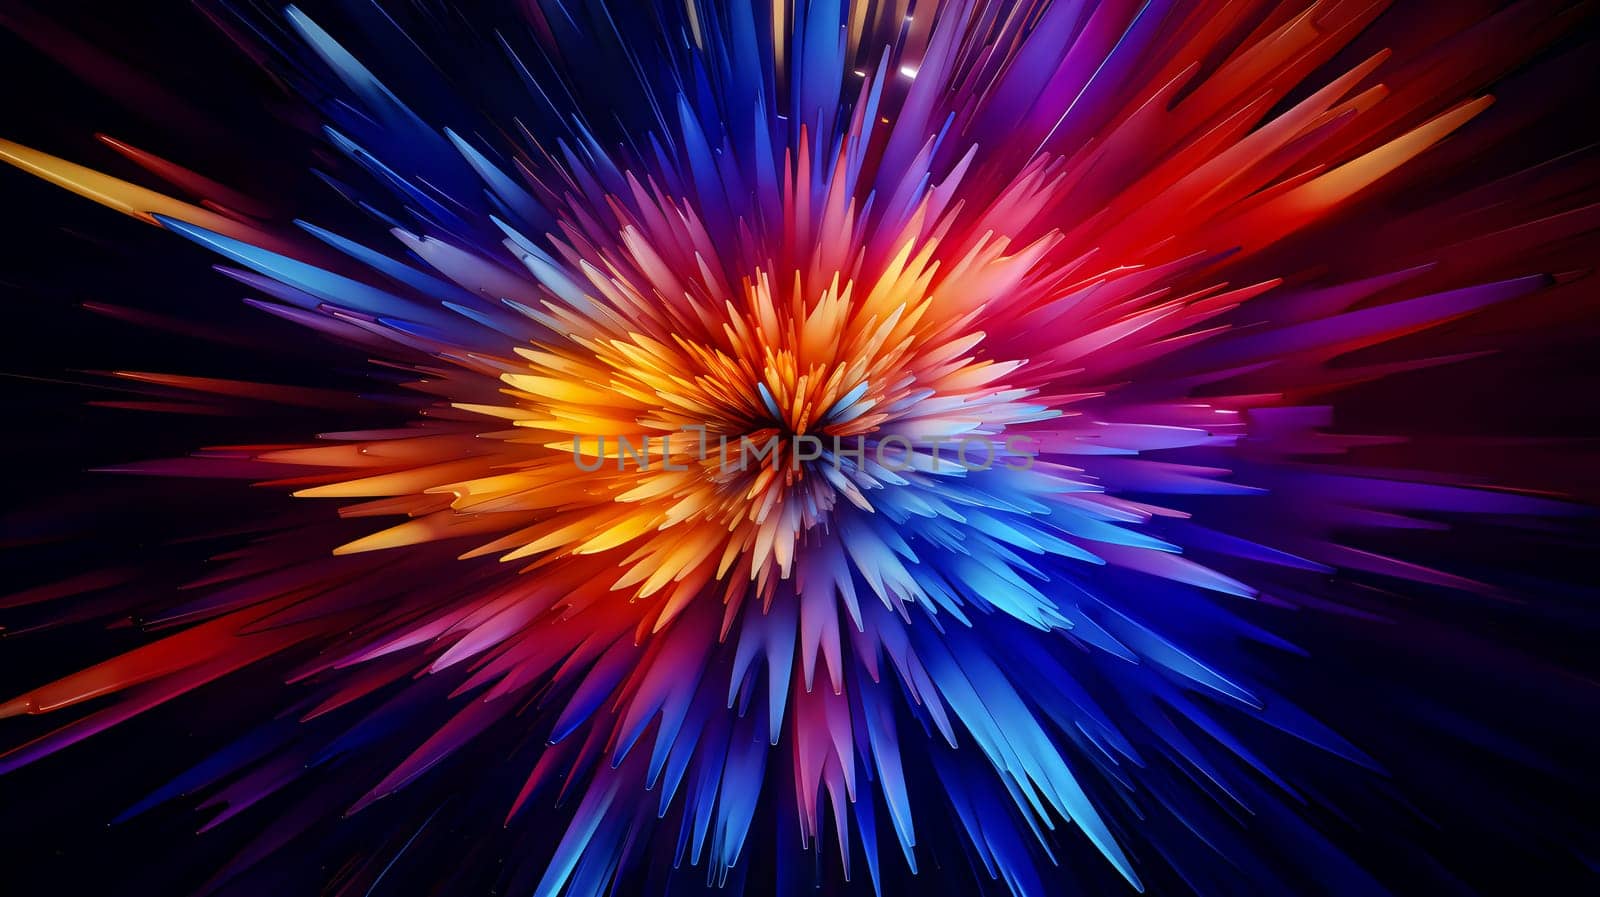 An electrifying abstract design capturing a vibrant explosion of light - cosmic event or a dazzling firework display by chrisroll